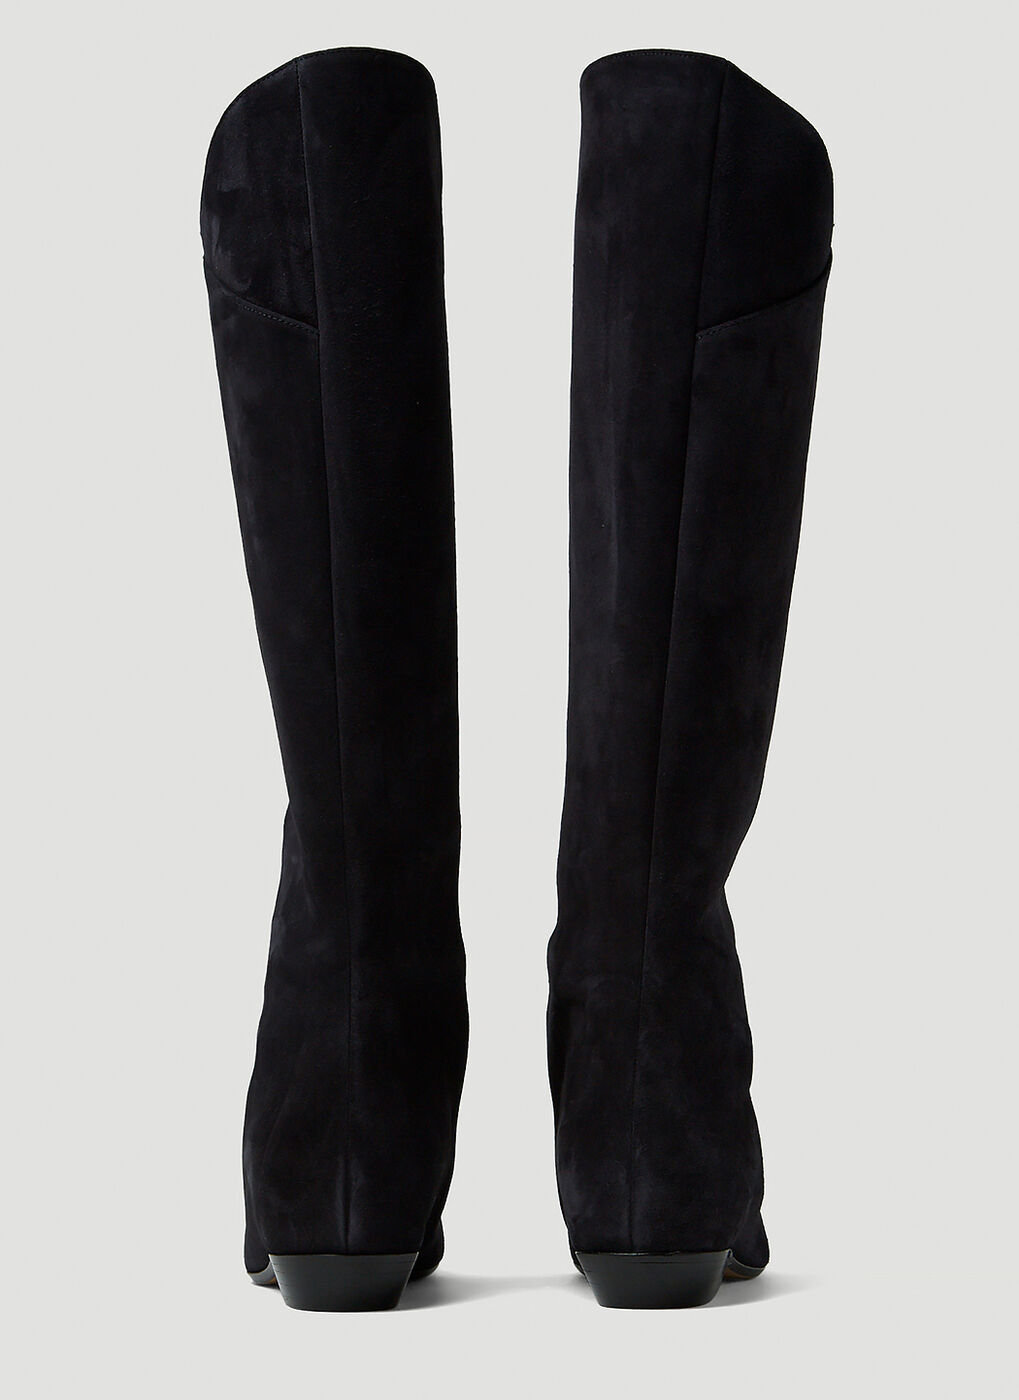 Shany Knee High Boots in Black